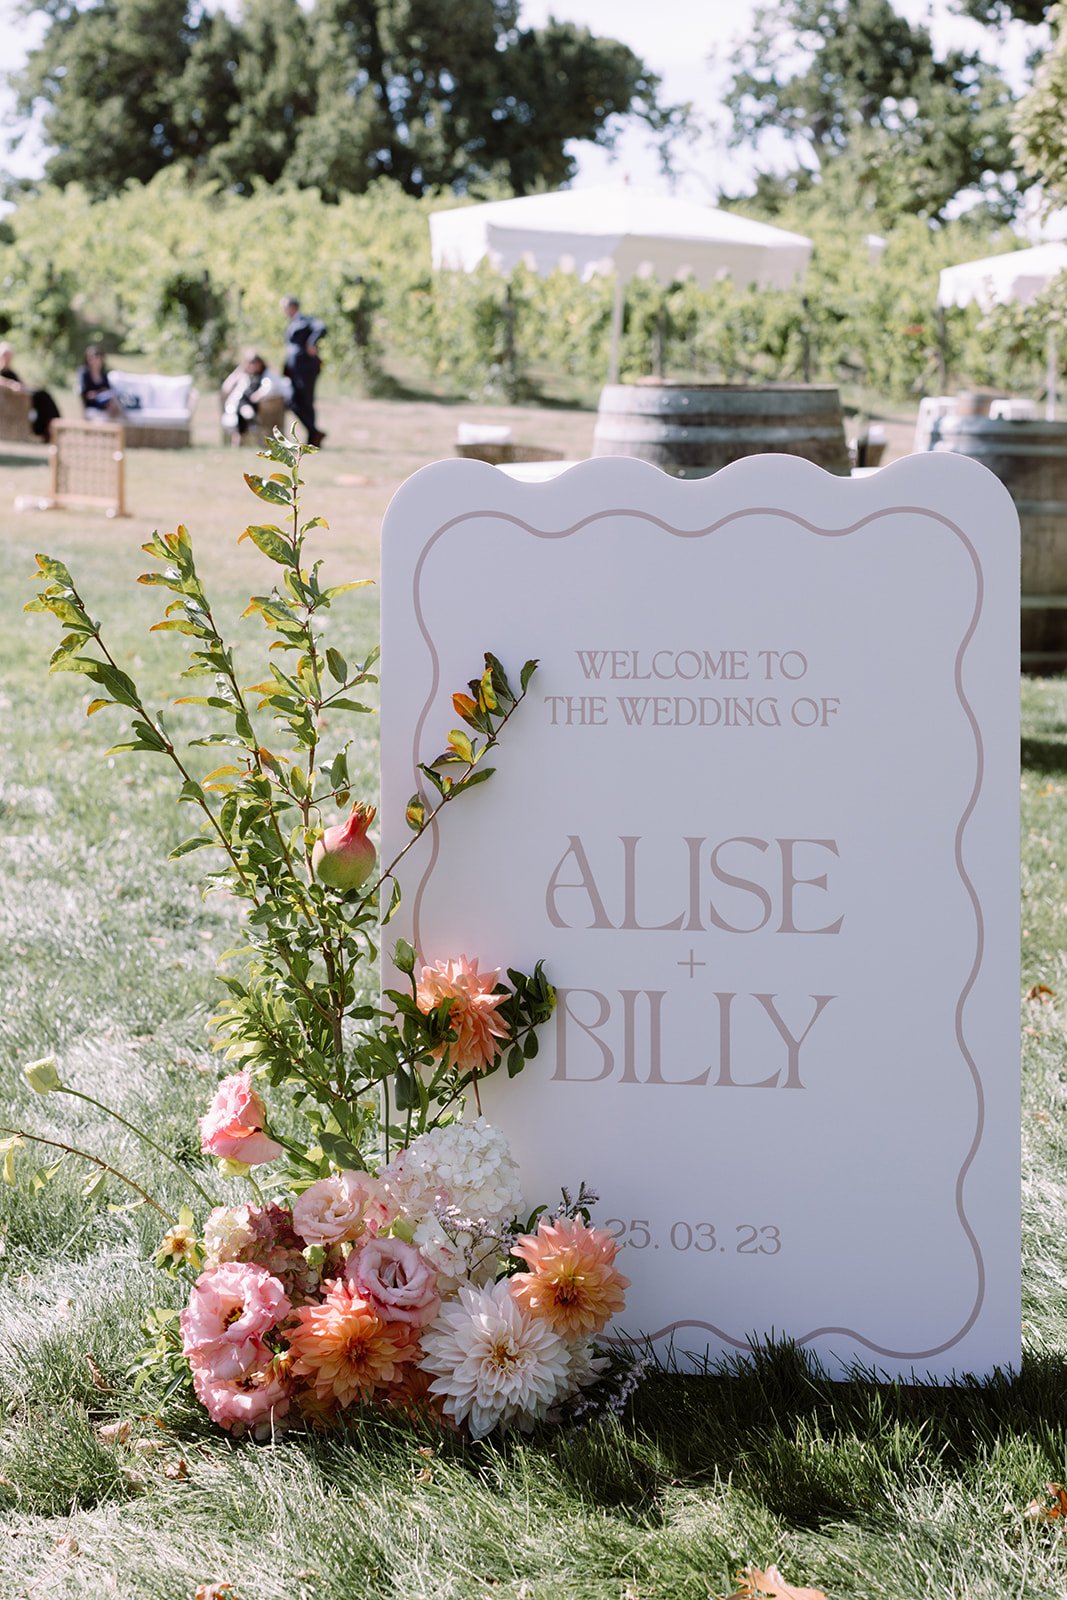 Sitting on grass, a cream, rectangle shape welcome sign with a wavey border, reading "Welcome to the wedding of Alise & Billy", designed by a Melbourne event stylist. A colourful floral setting of pinks, oranges, white and green sits against the left side of the sign. In the background is a game area with old wine barrels, stools and scalloped umbrellas for sitting. 